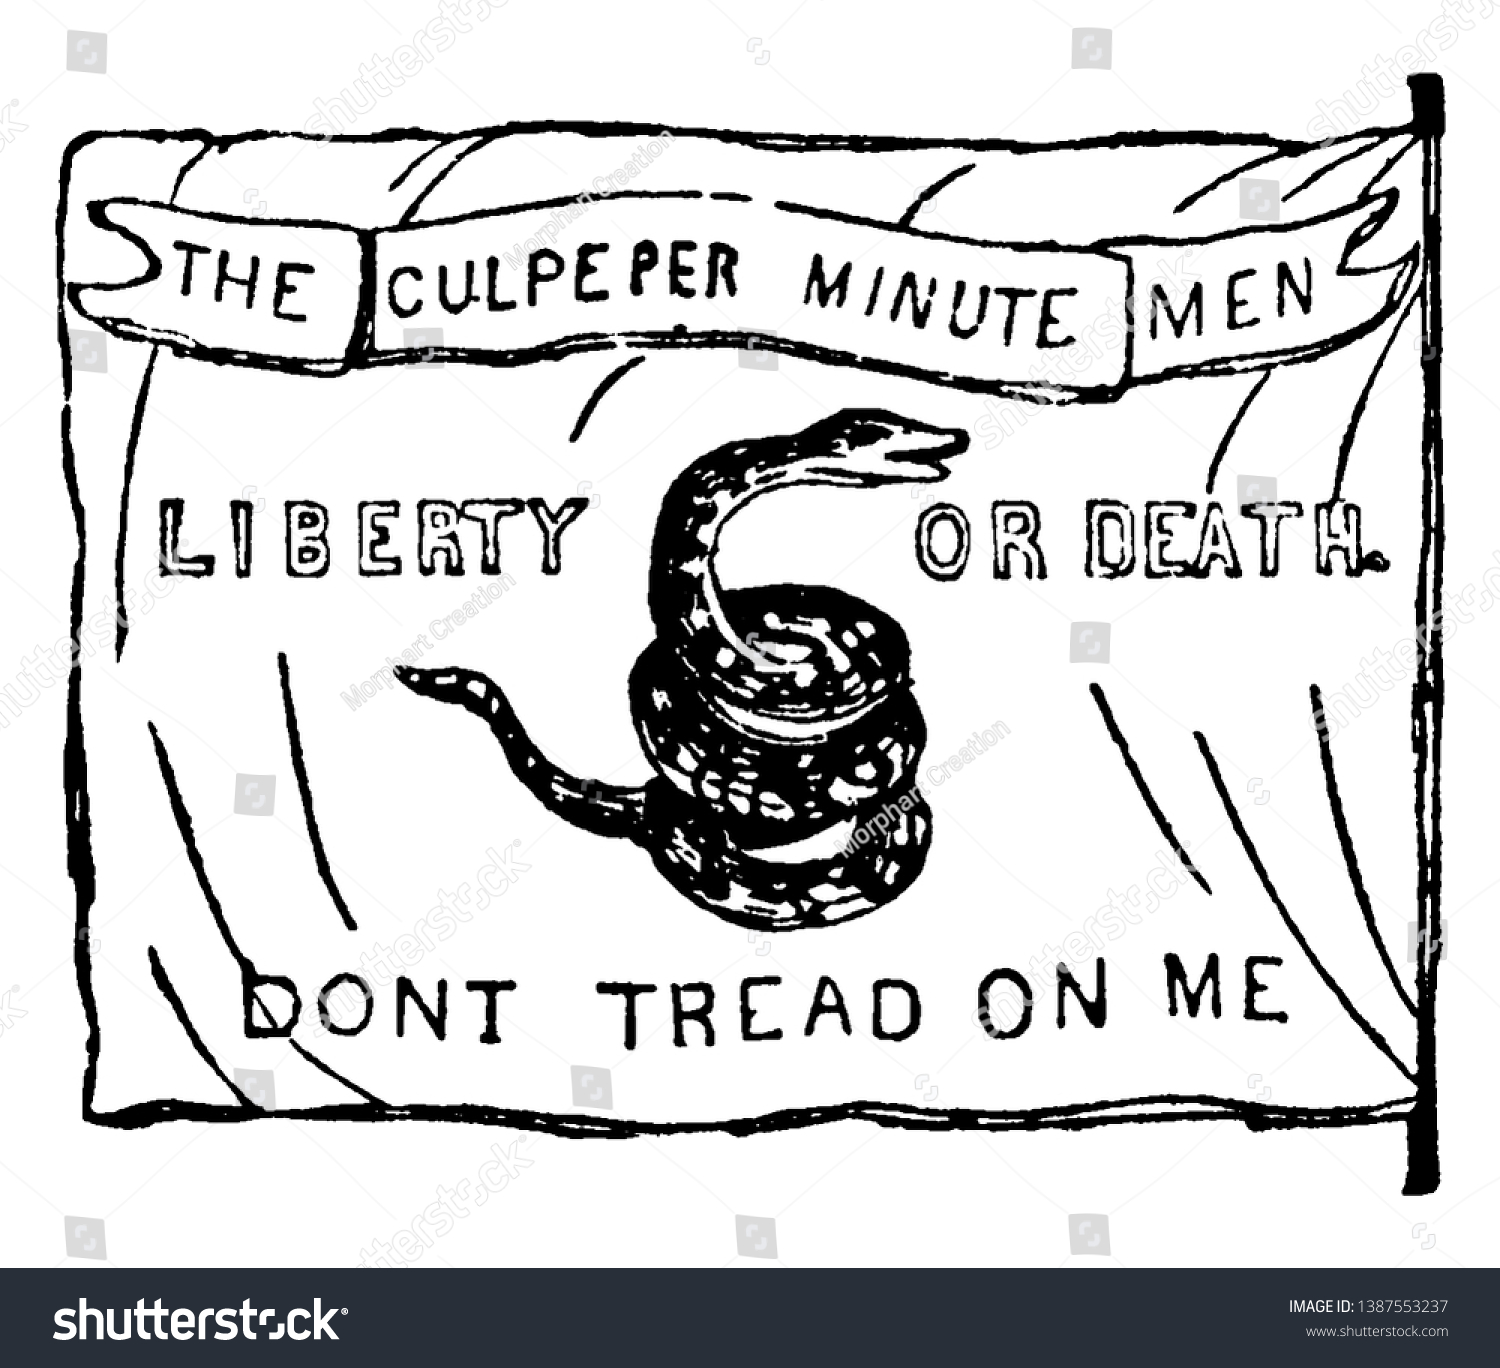 SVG of The Culpepper Flag, this flag has snake in center, DONT TREAD ON ME is written at bottom of flag, vintage line drawing or engraving illustration svg